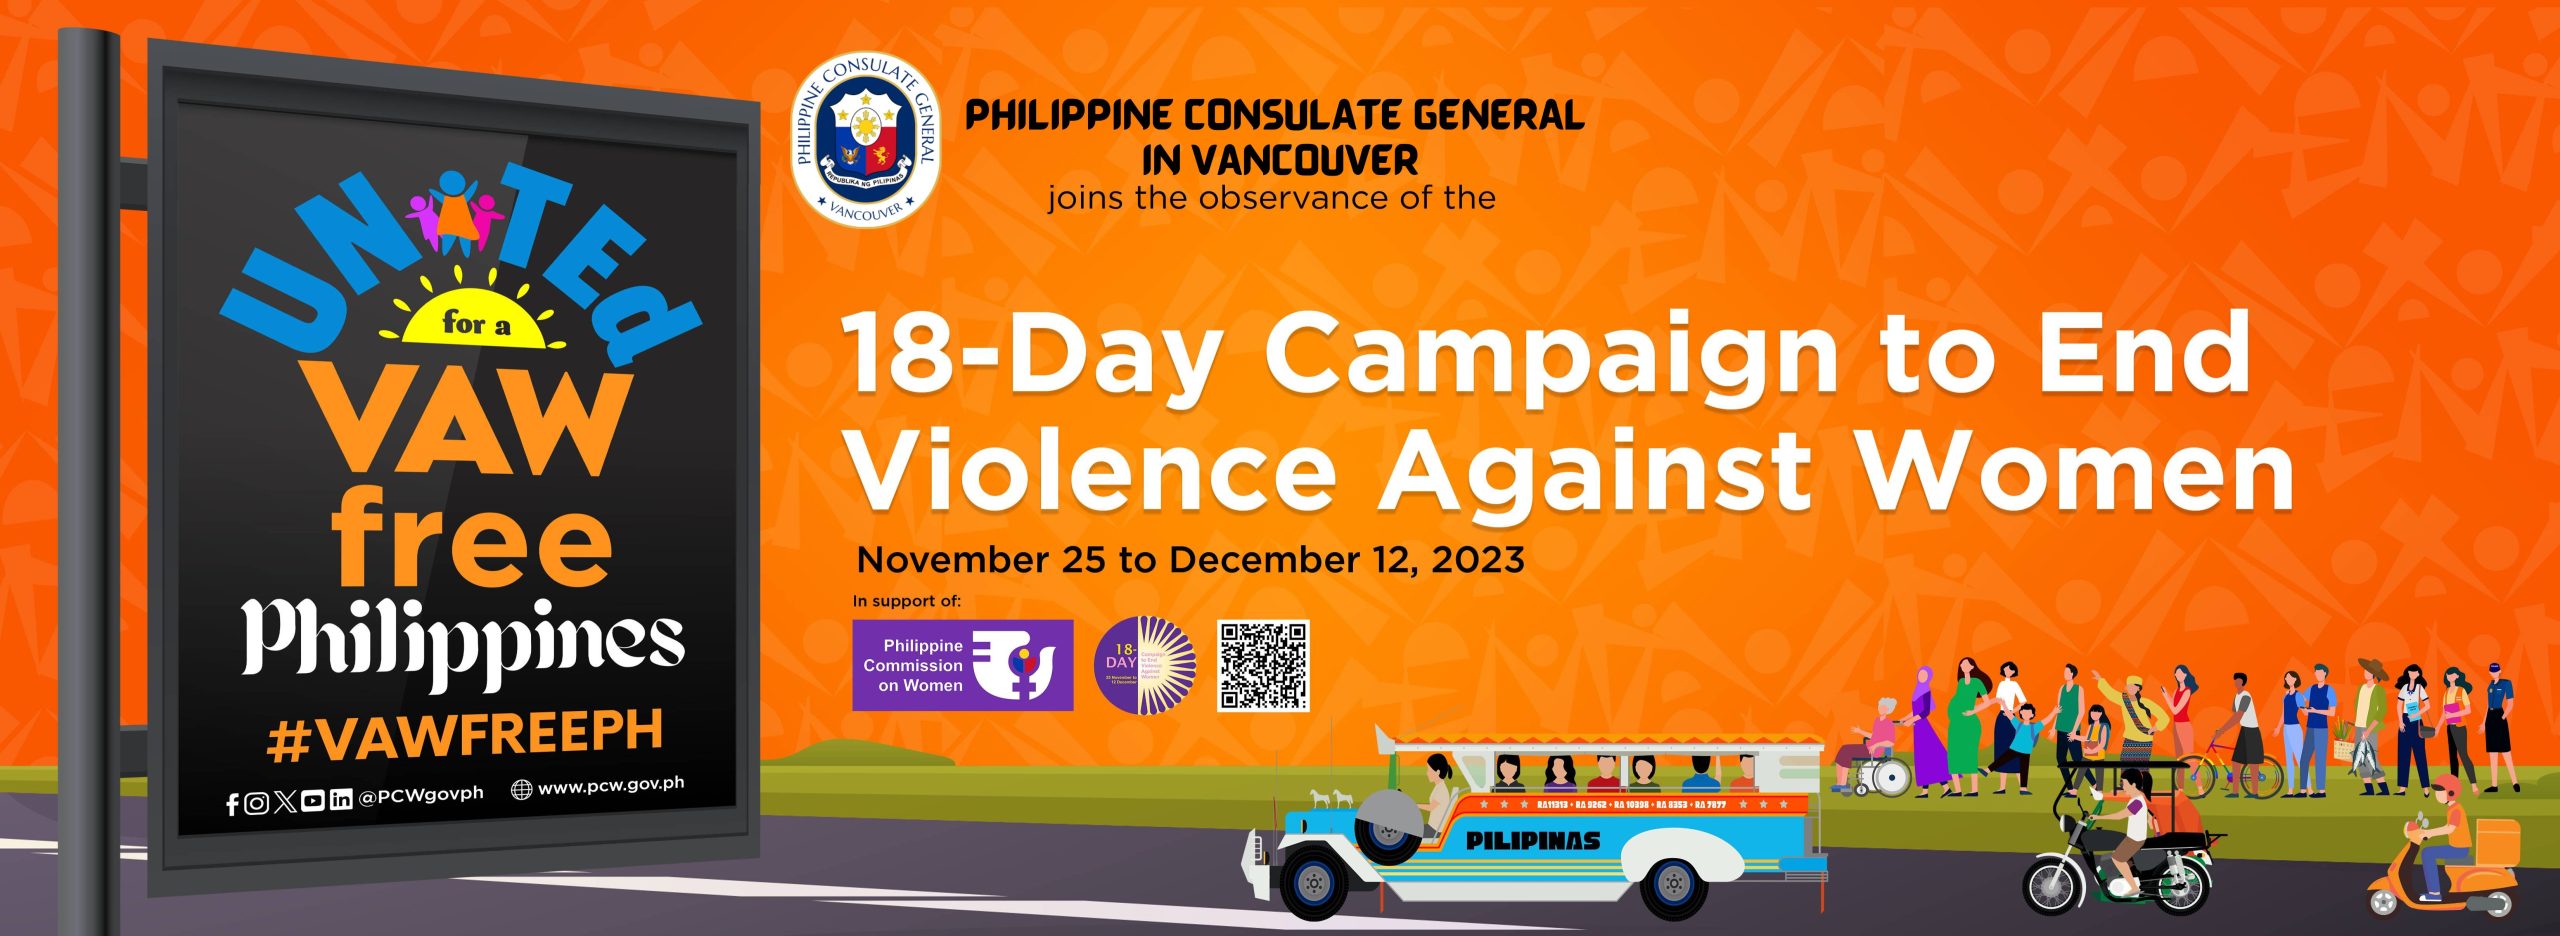 18 Day Campaign To End Violence Against Women Vaw 25 November To 12 December 2023 Vancouver